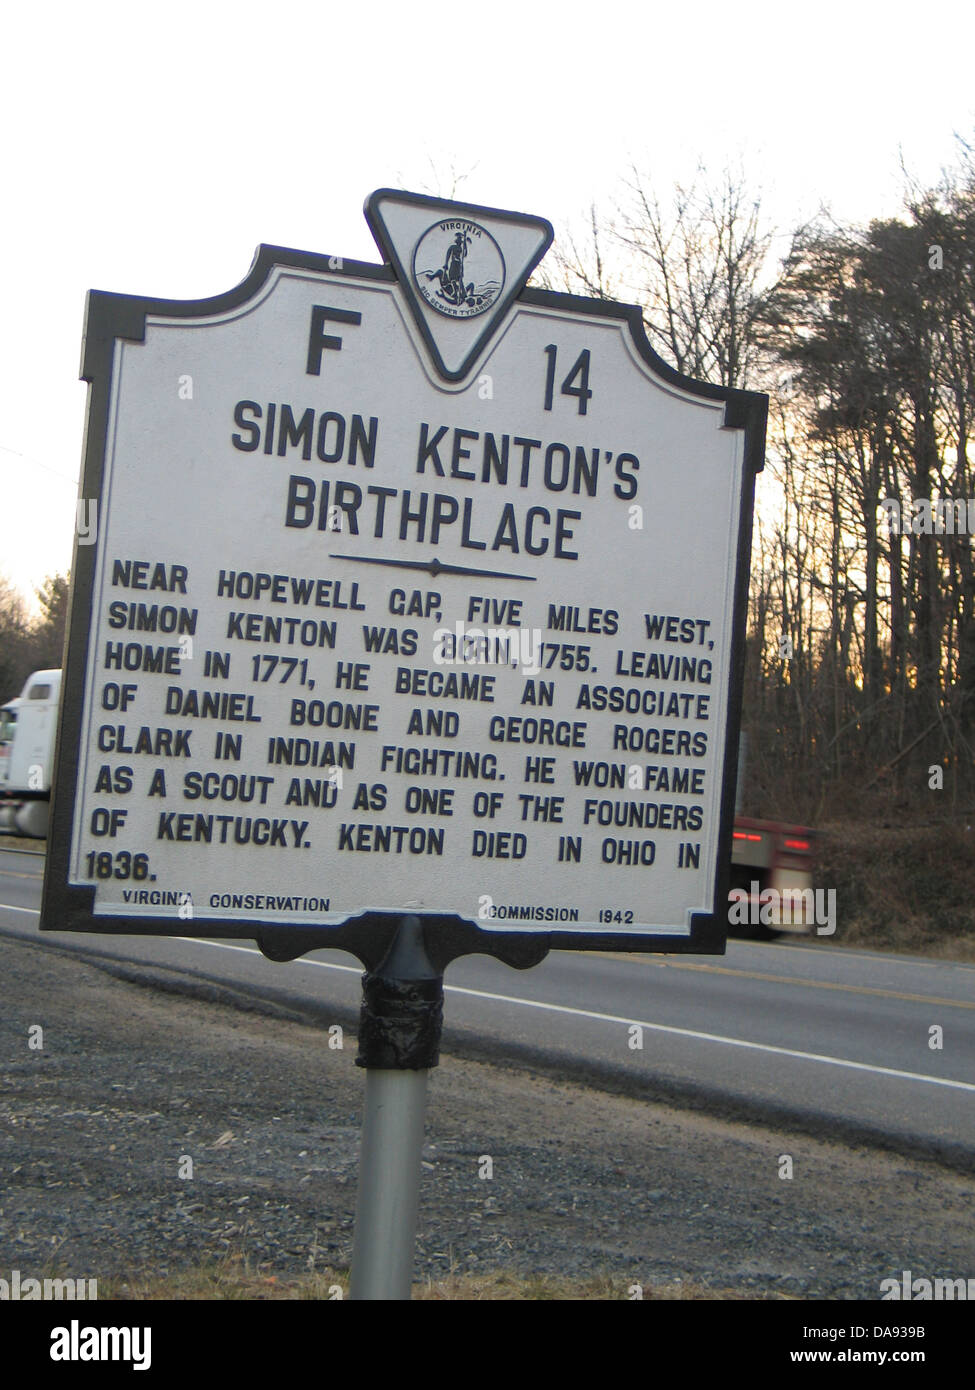 SIMON KENTON'S BIRTHPLACE Near Hopewell Gap, five miles west, Simon Kenton was born, 1755. Leaving home in 1771, he became an associate on Daniel Boone and George Rogers Clark in Indian fighting. He won fame as a scout and as one of the founders of Kentucky. Kenton died in Ohio in 1836. Virginia Conservation Commission 1942 Stock Photo